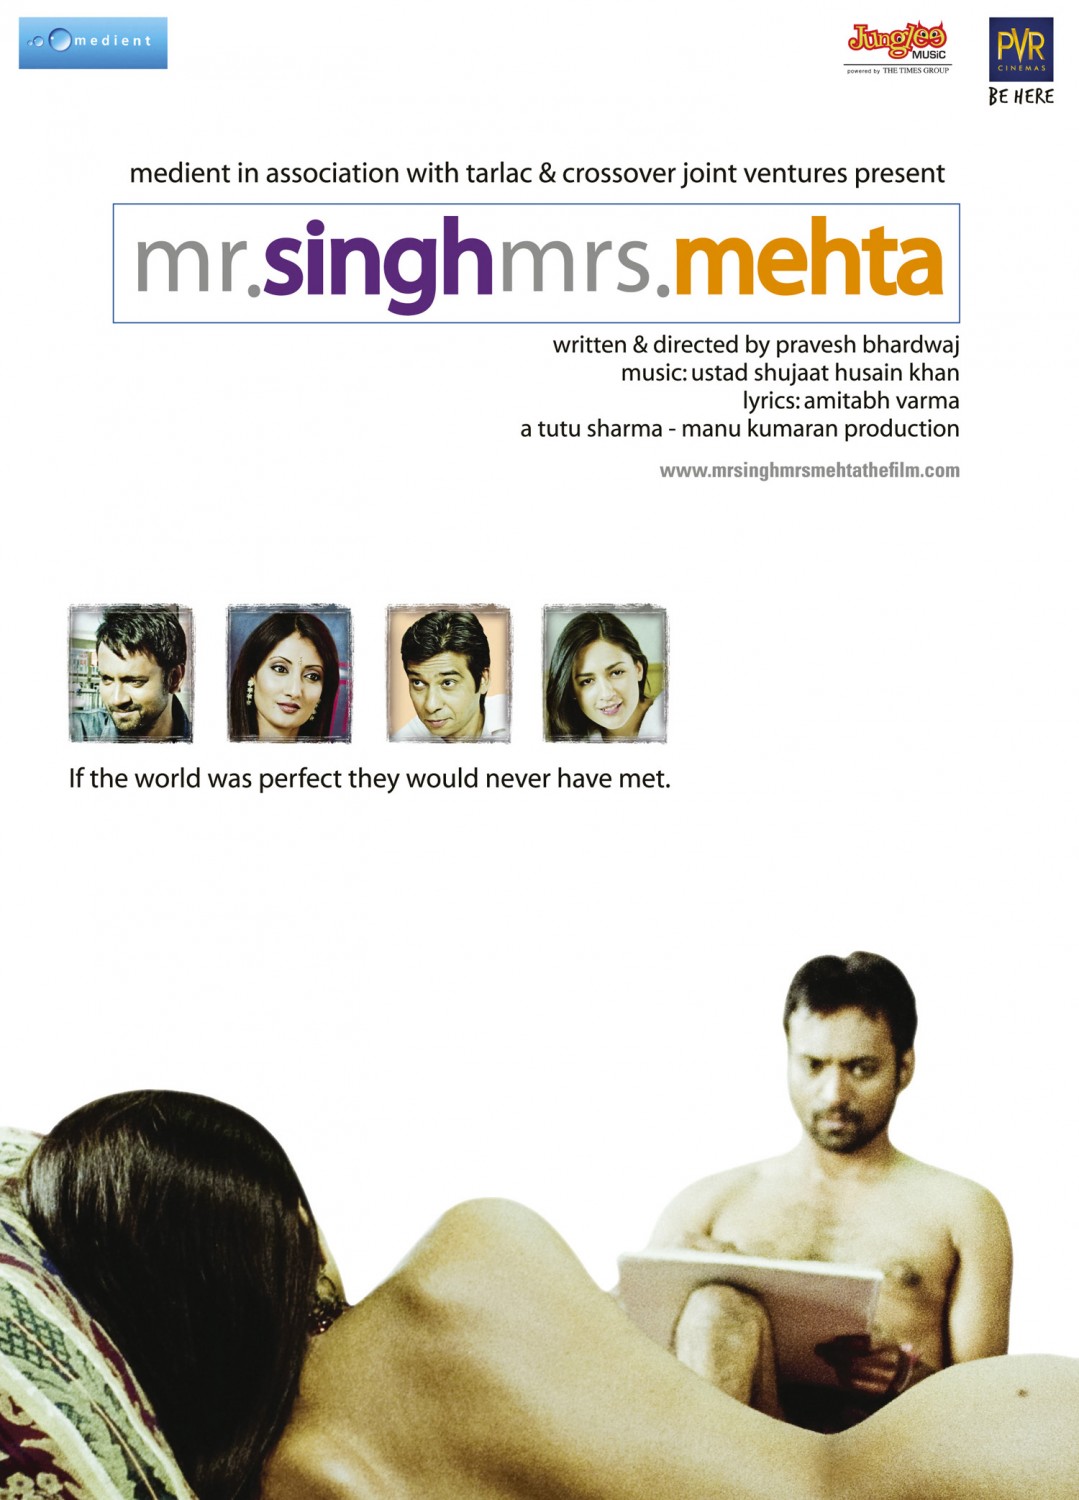 Extra Large Movie Poster Image for Mr. Singh/Mrs. Mehta 